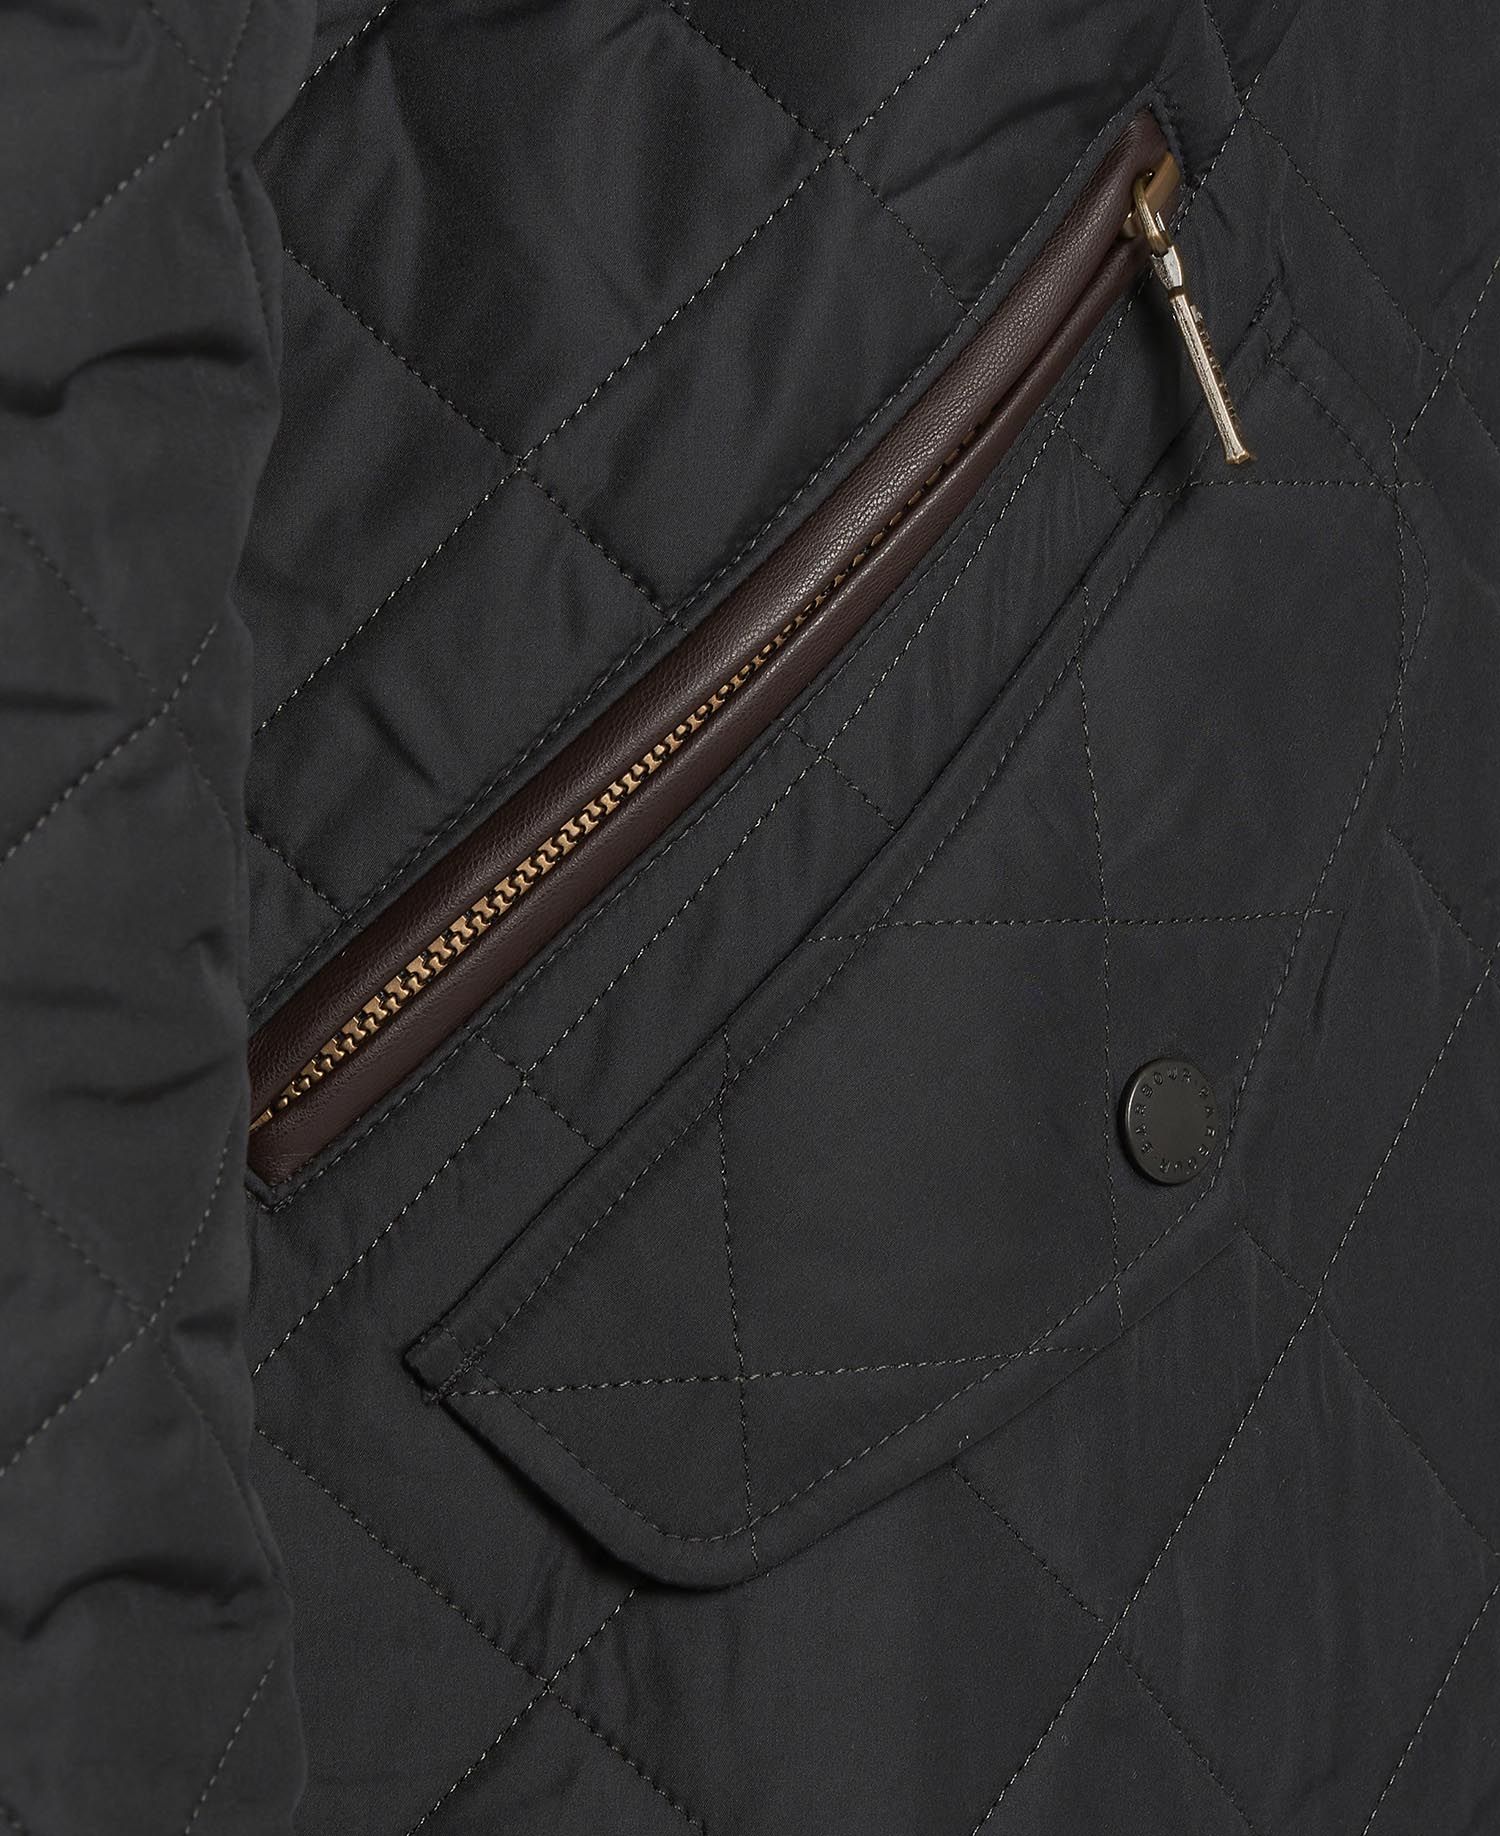 Barbour Navy Chelsea Quilted Jacket